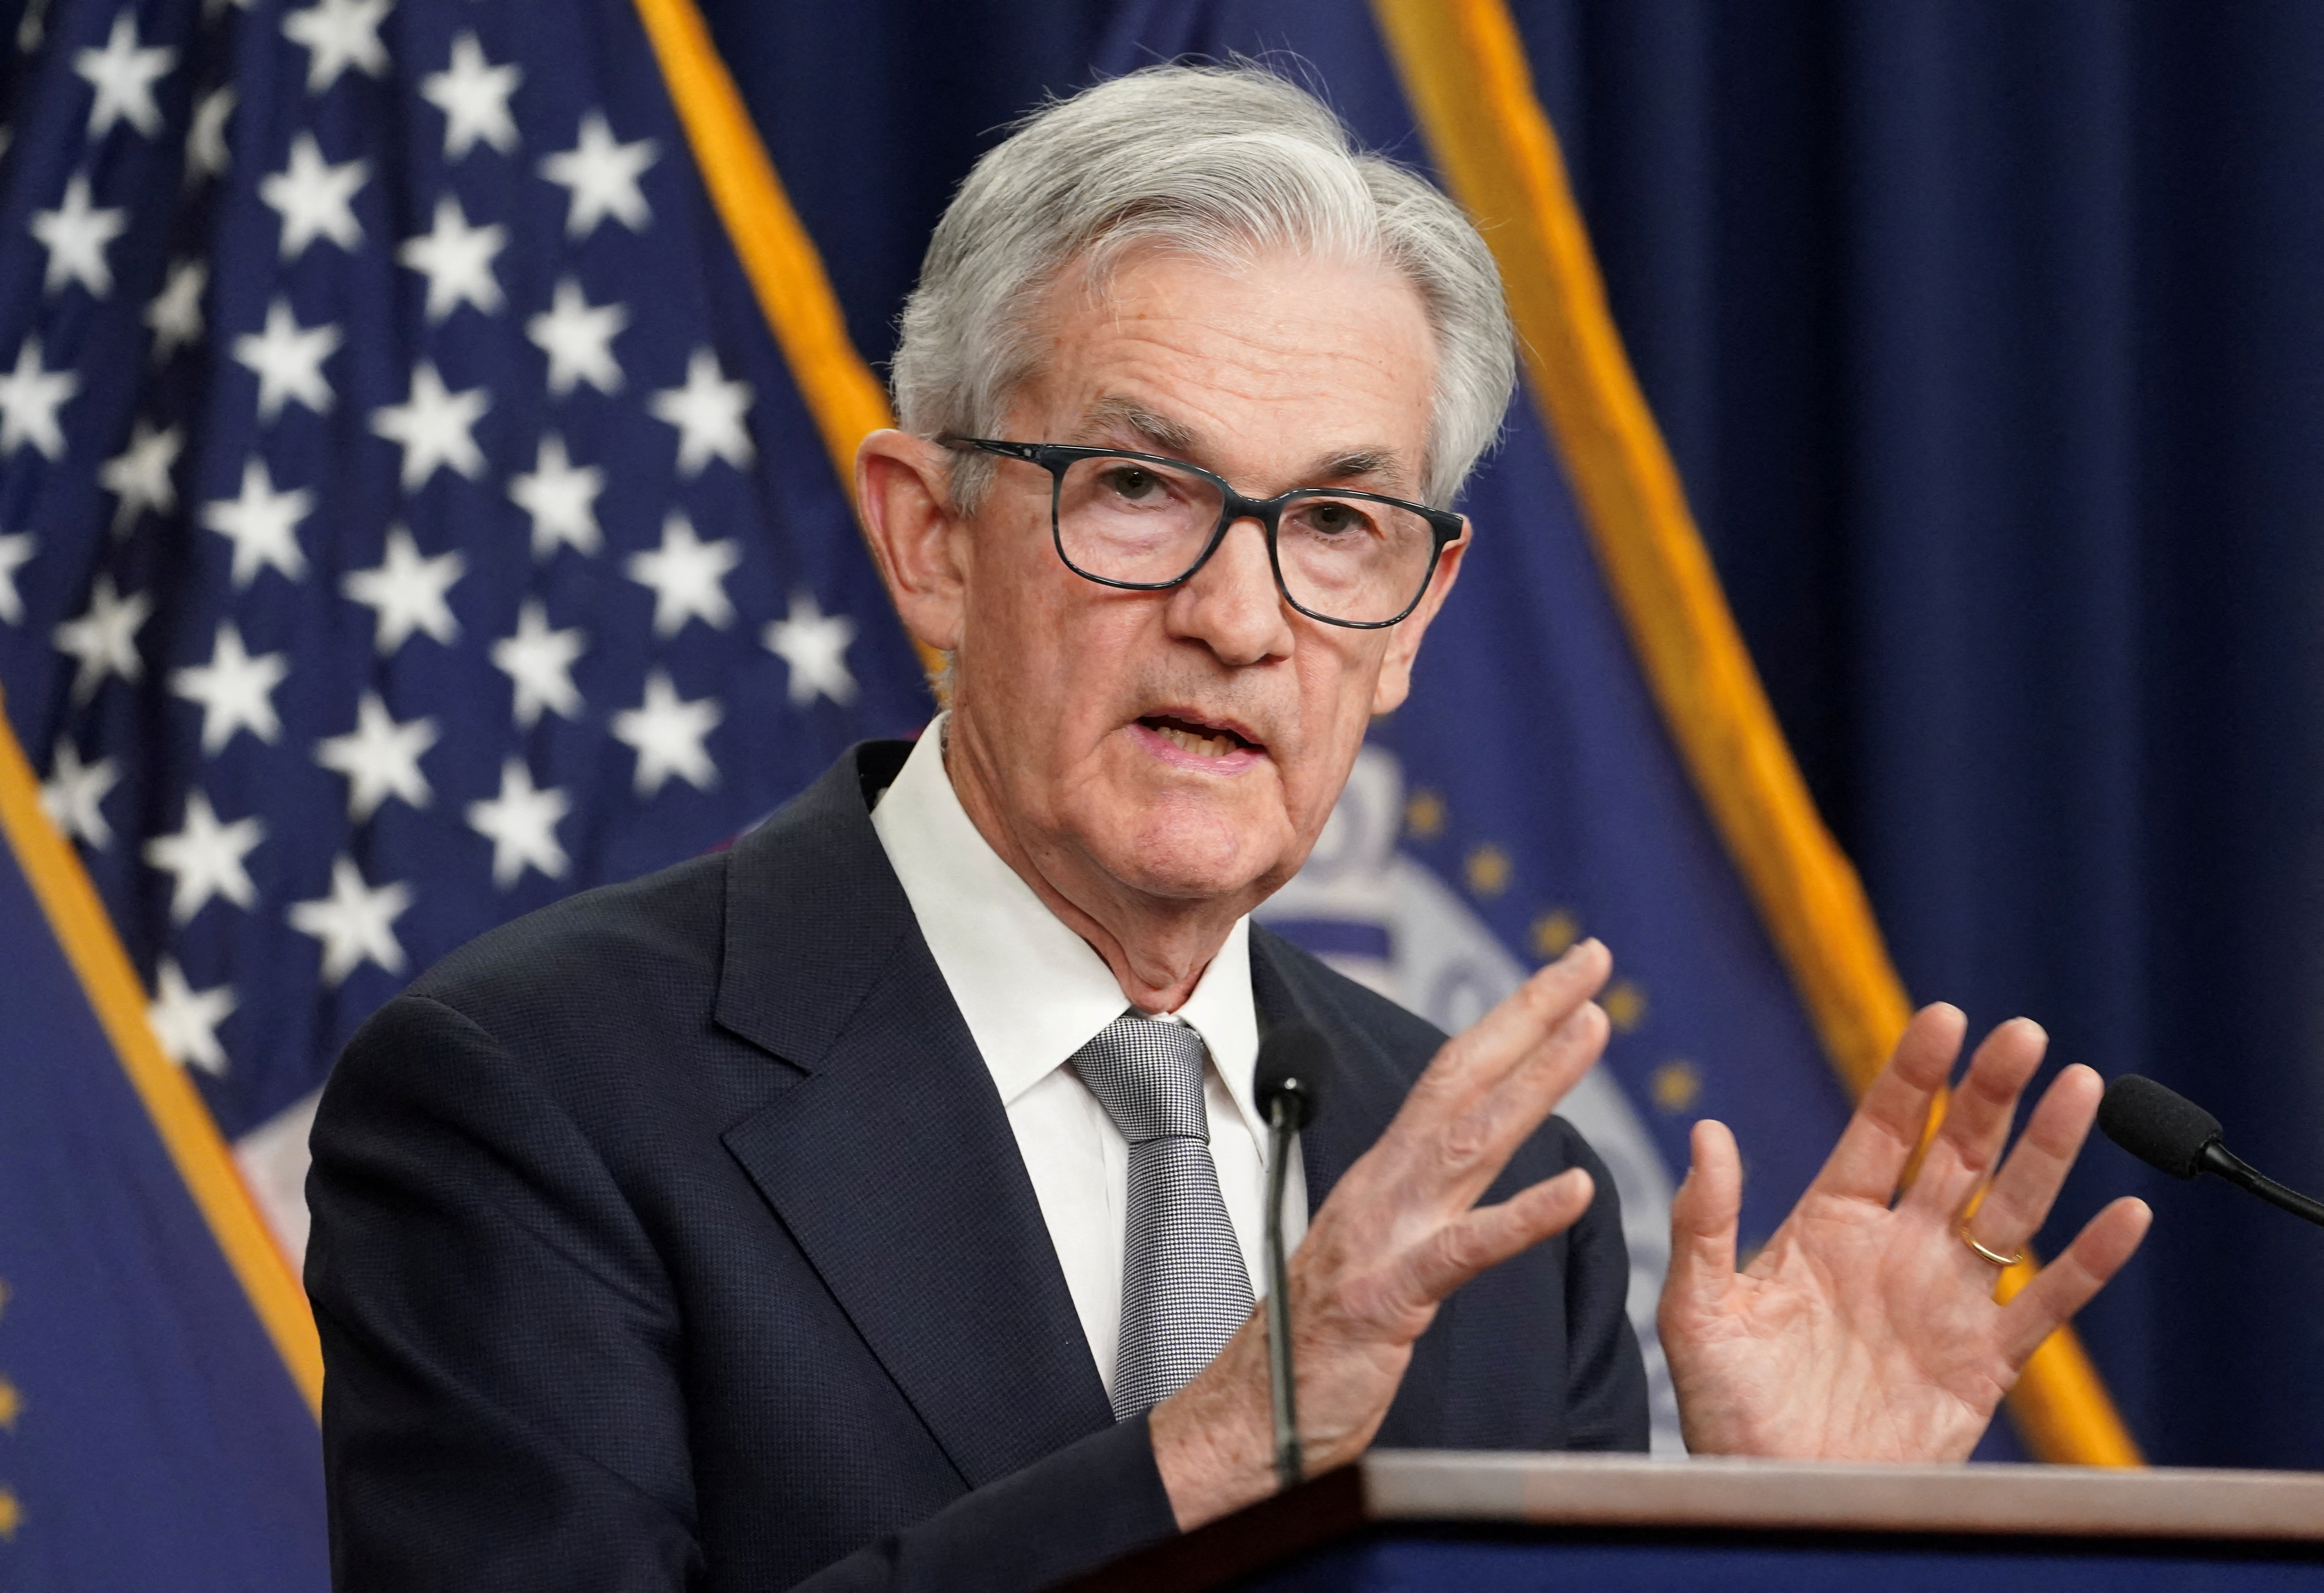 Federal Reserve Chairman Jerome Powell speaks at a press conference in Washington